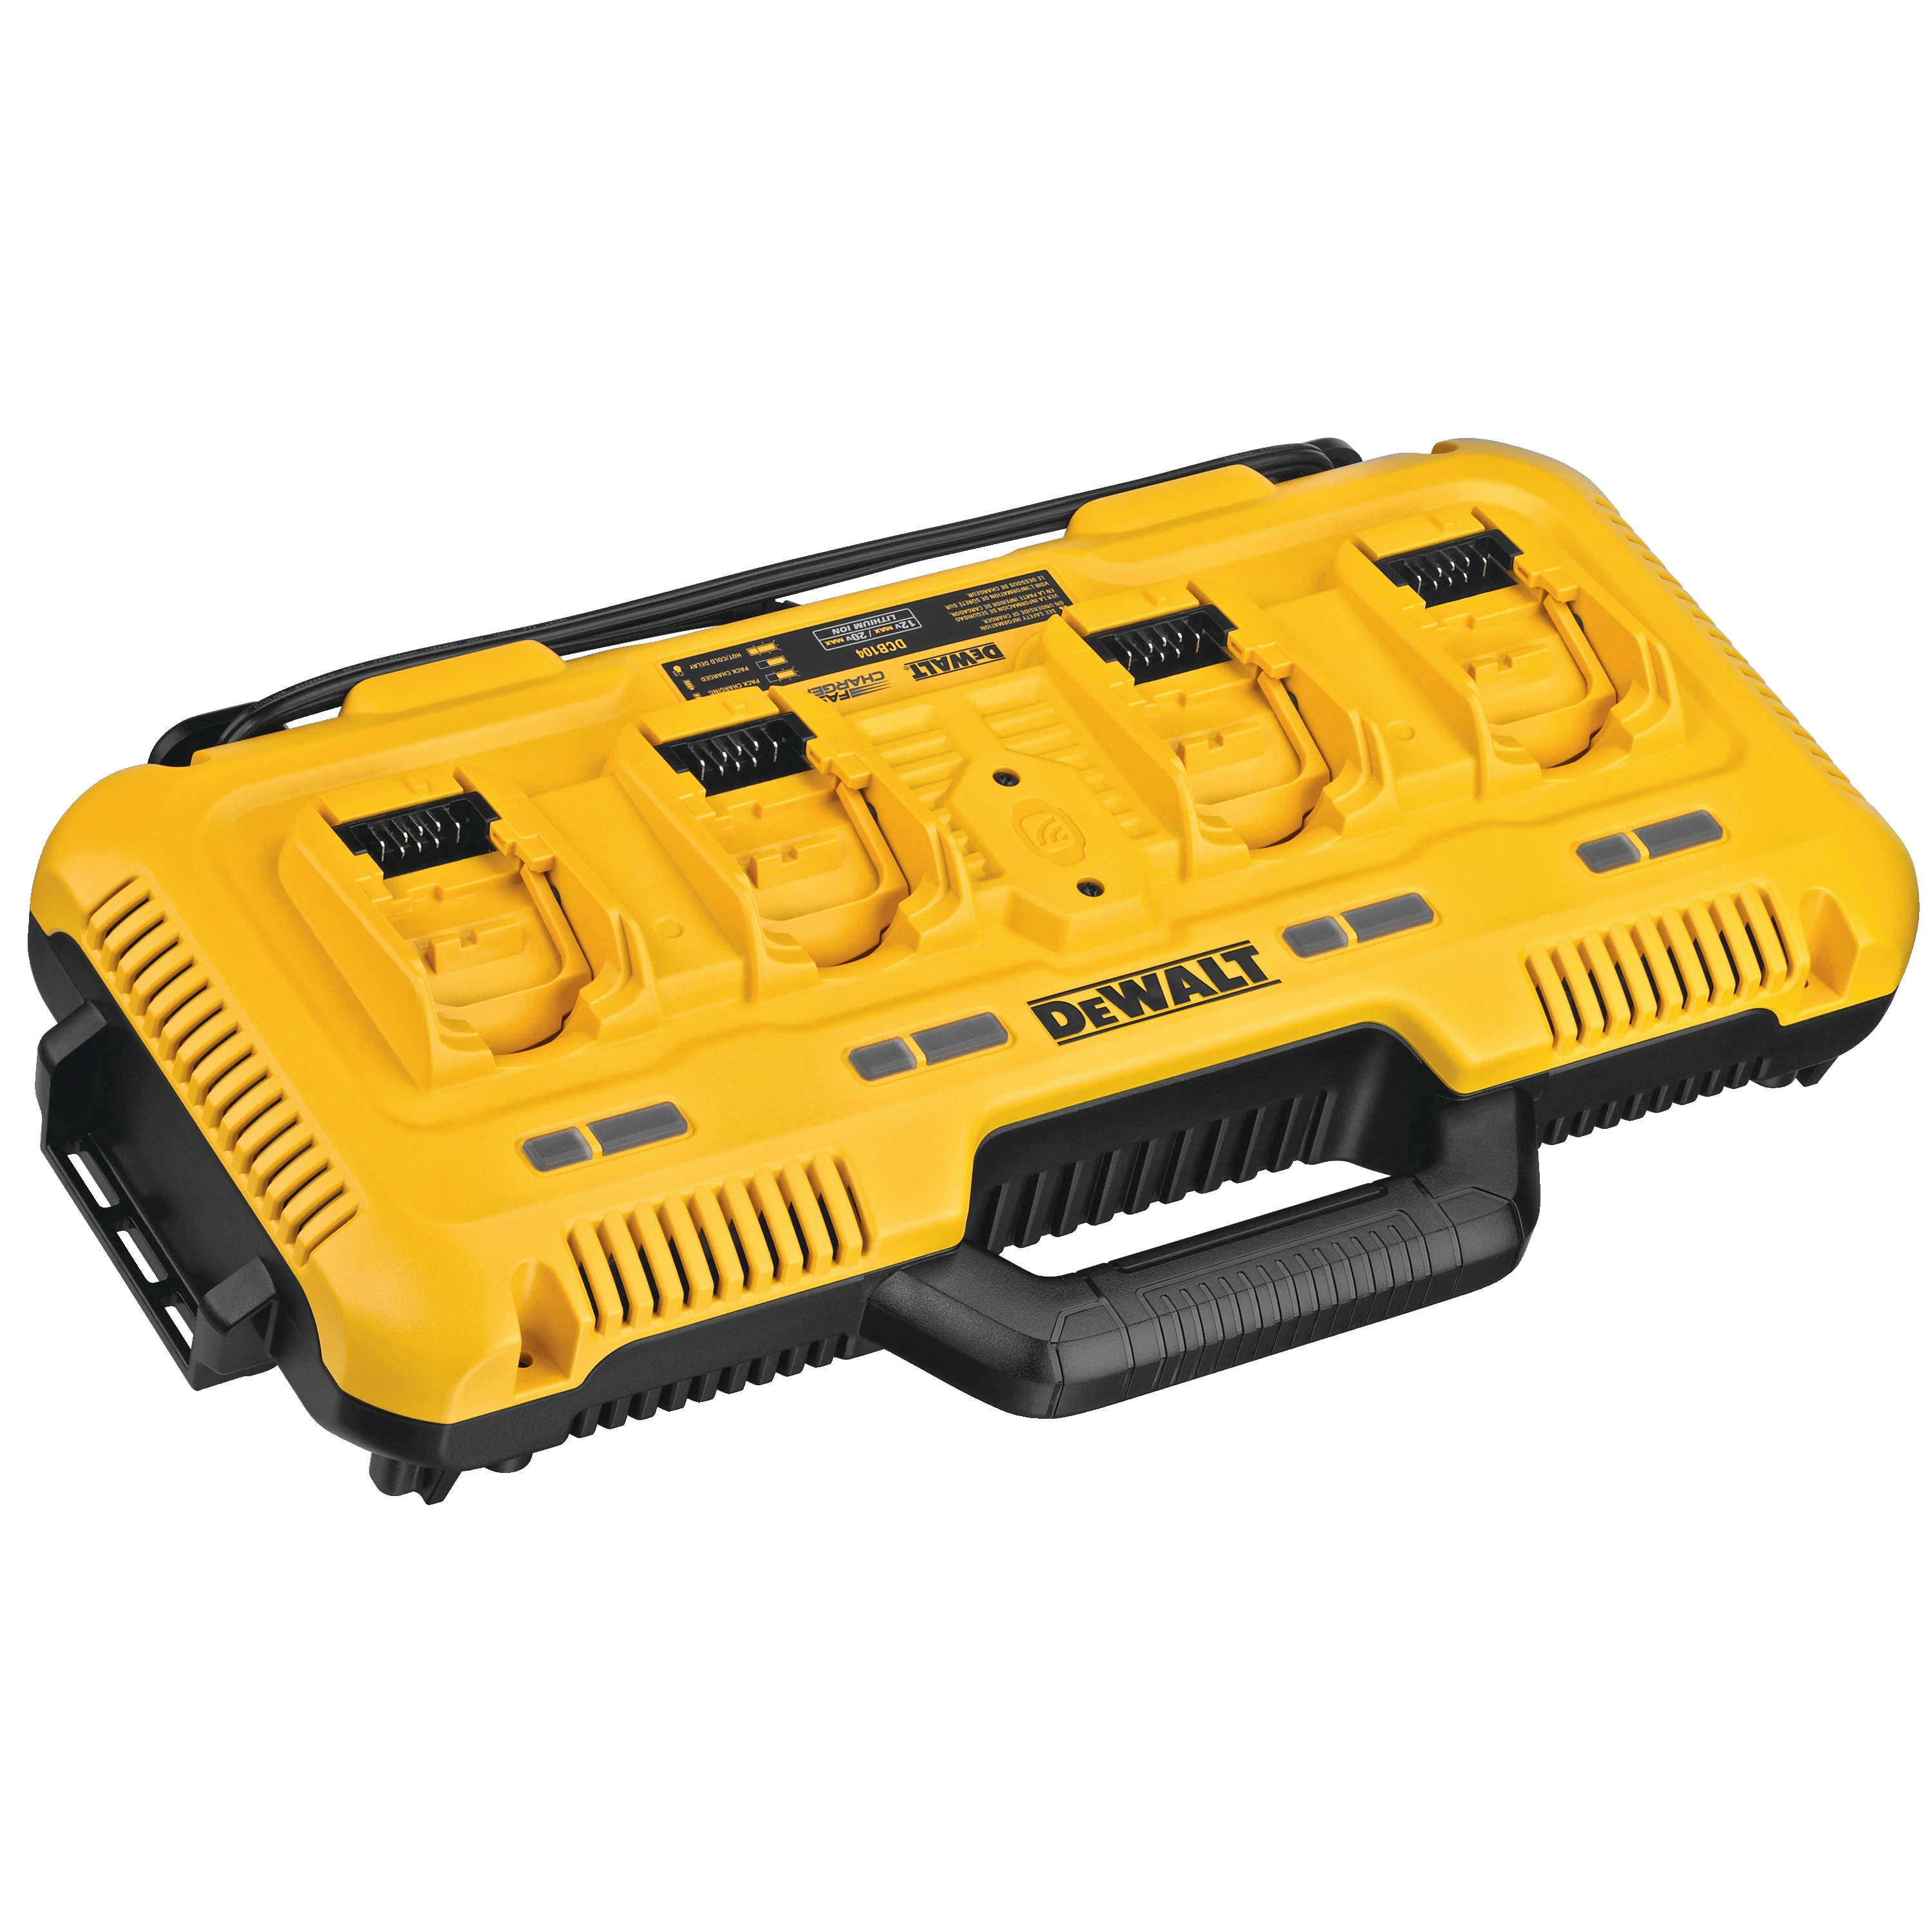 DeWalt Multiport Simultaneous Fast Charger - Power Tool Accessories